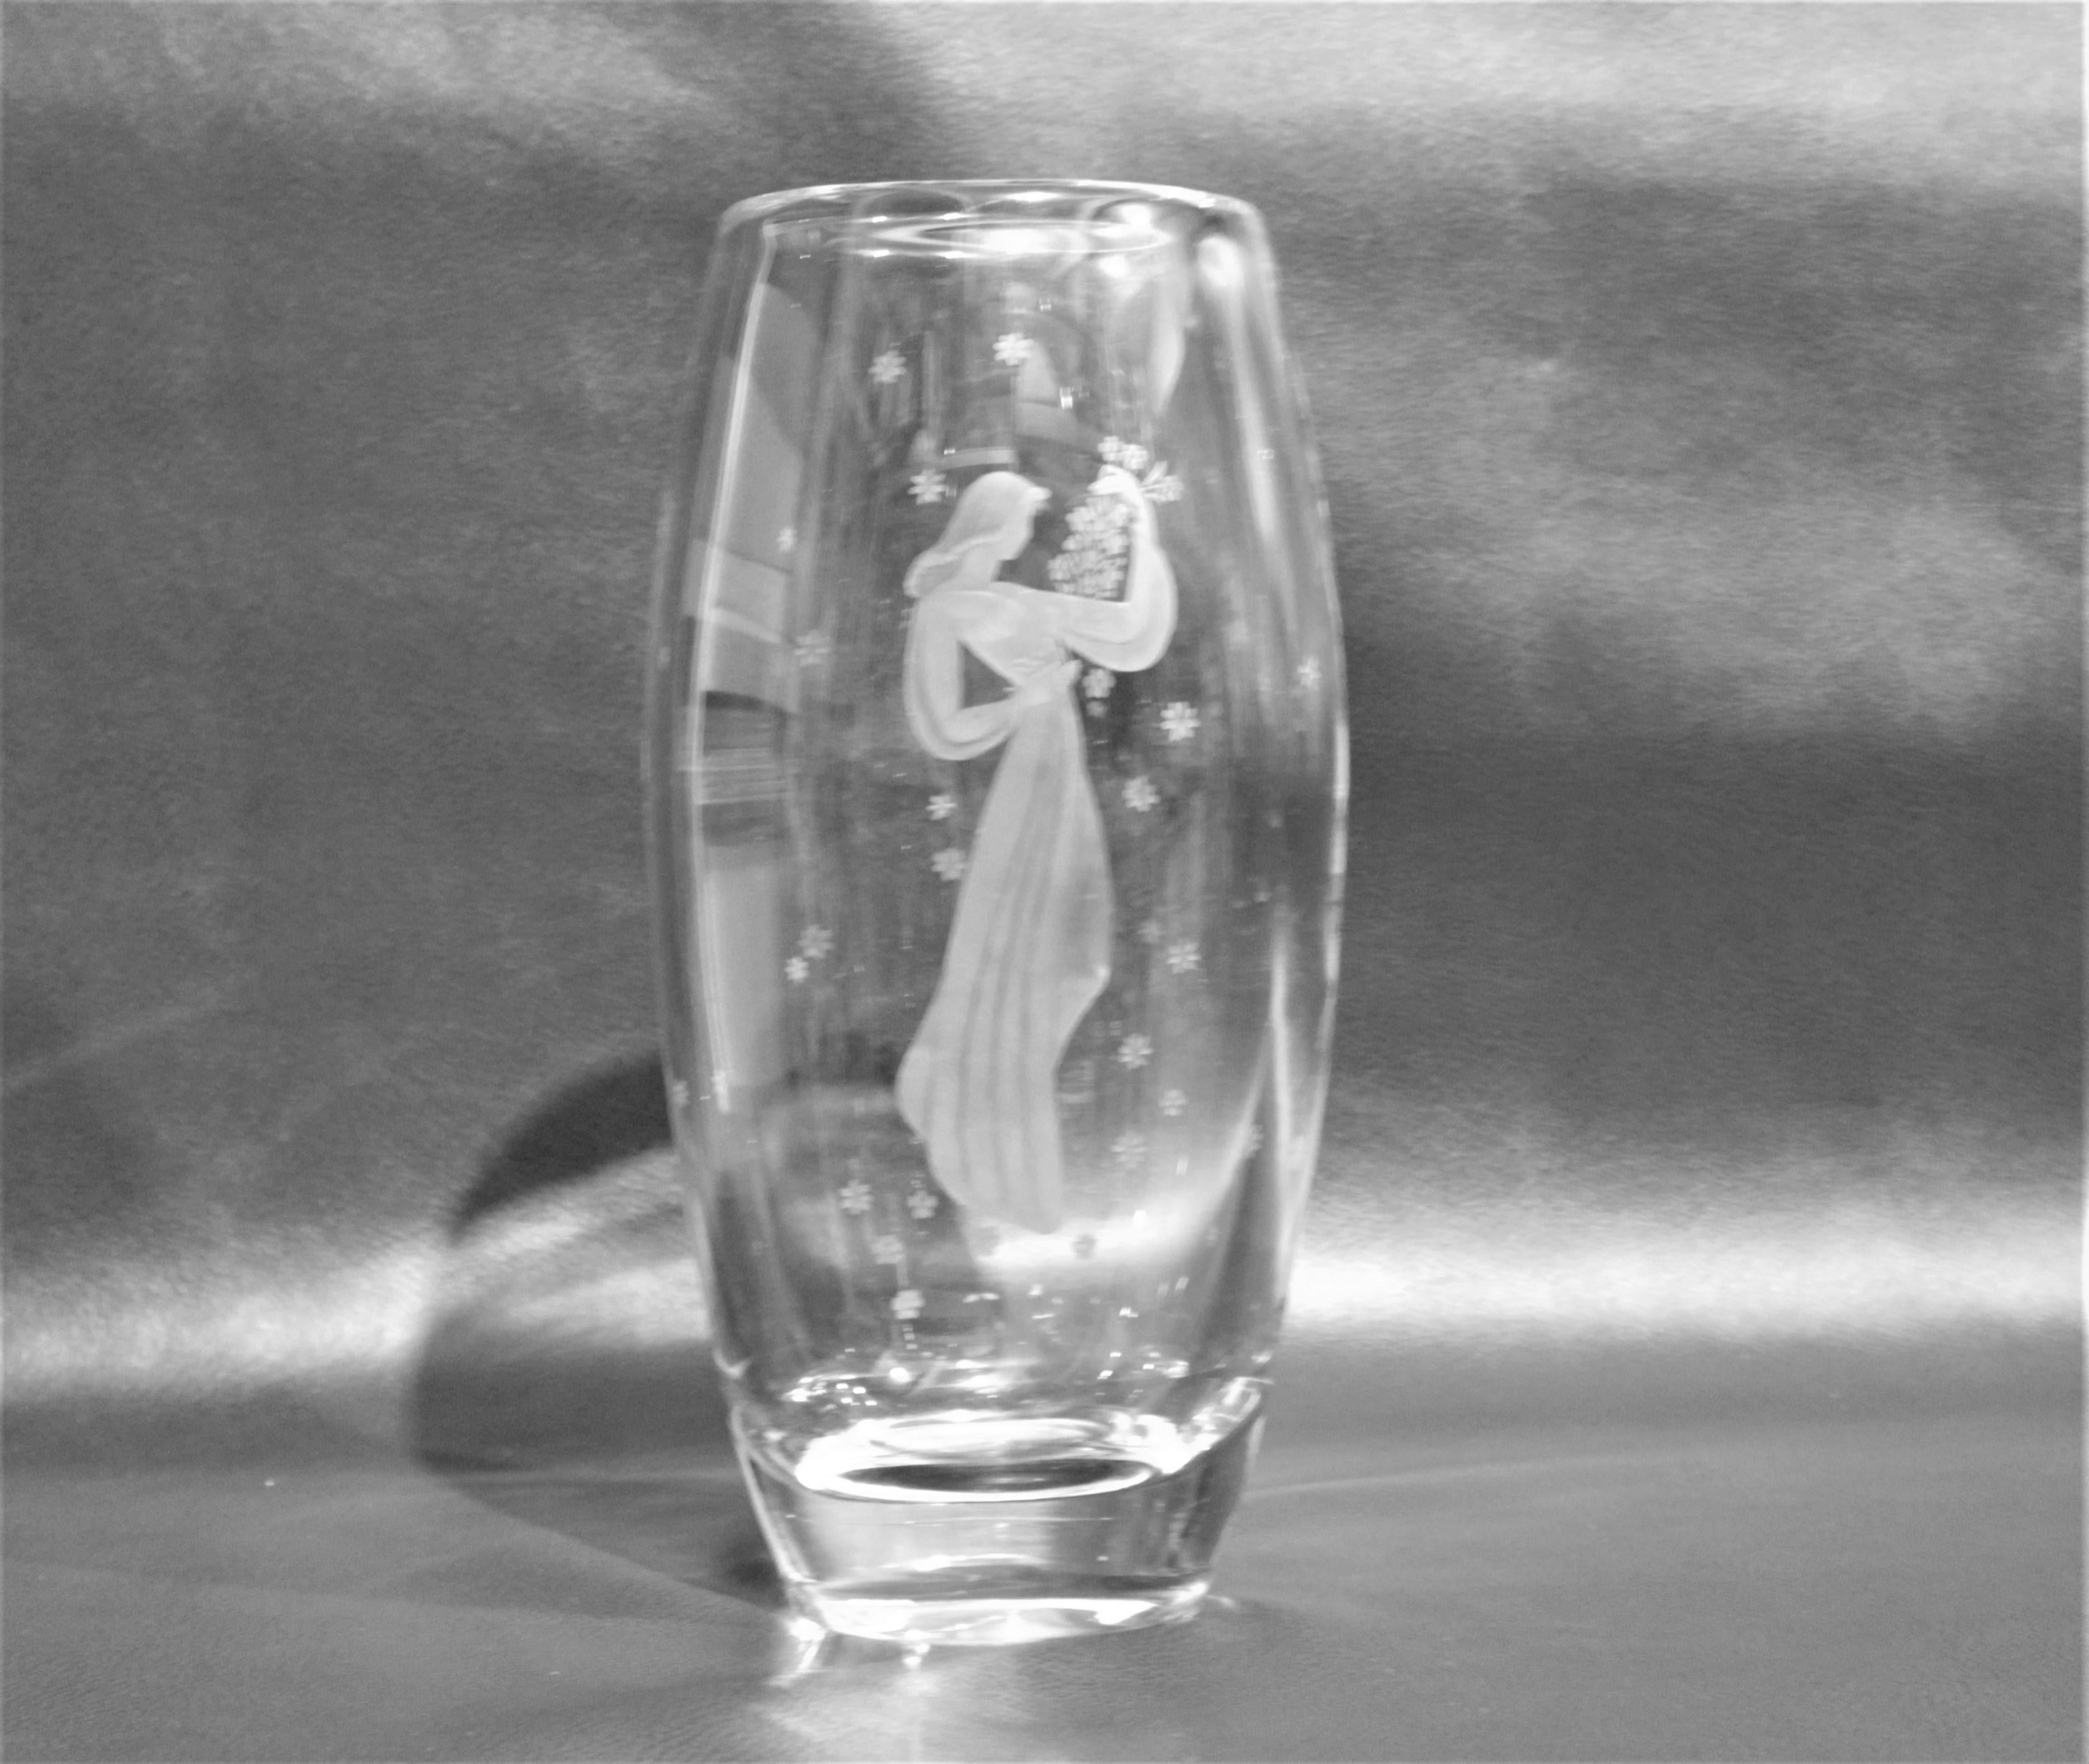 This large signed Orrefors crystal vase was made in Sweden during the 1970s in a Mid-Century Modern style and stands almost a foot tall. The vase depicts a stylized maiden holding a bouquet of flowers with a series of stylized flowers that